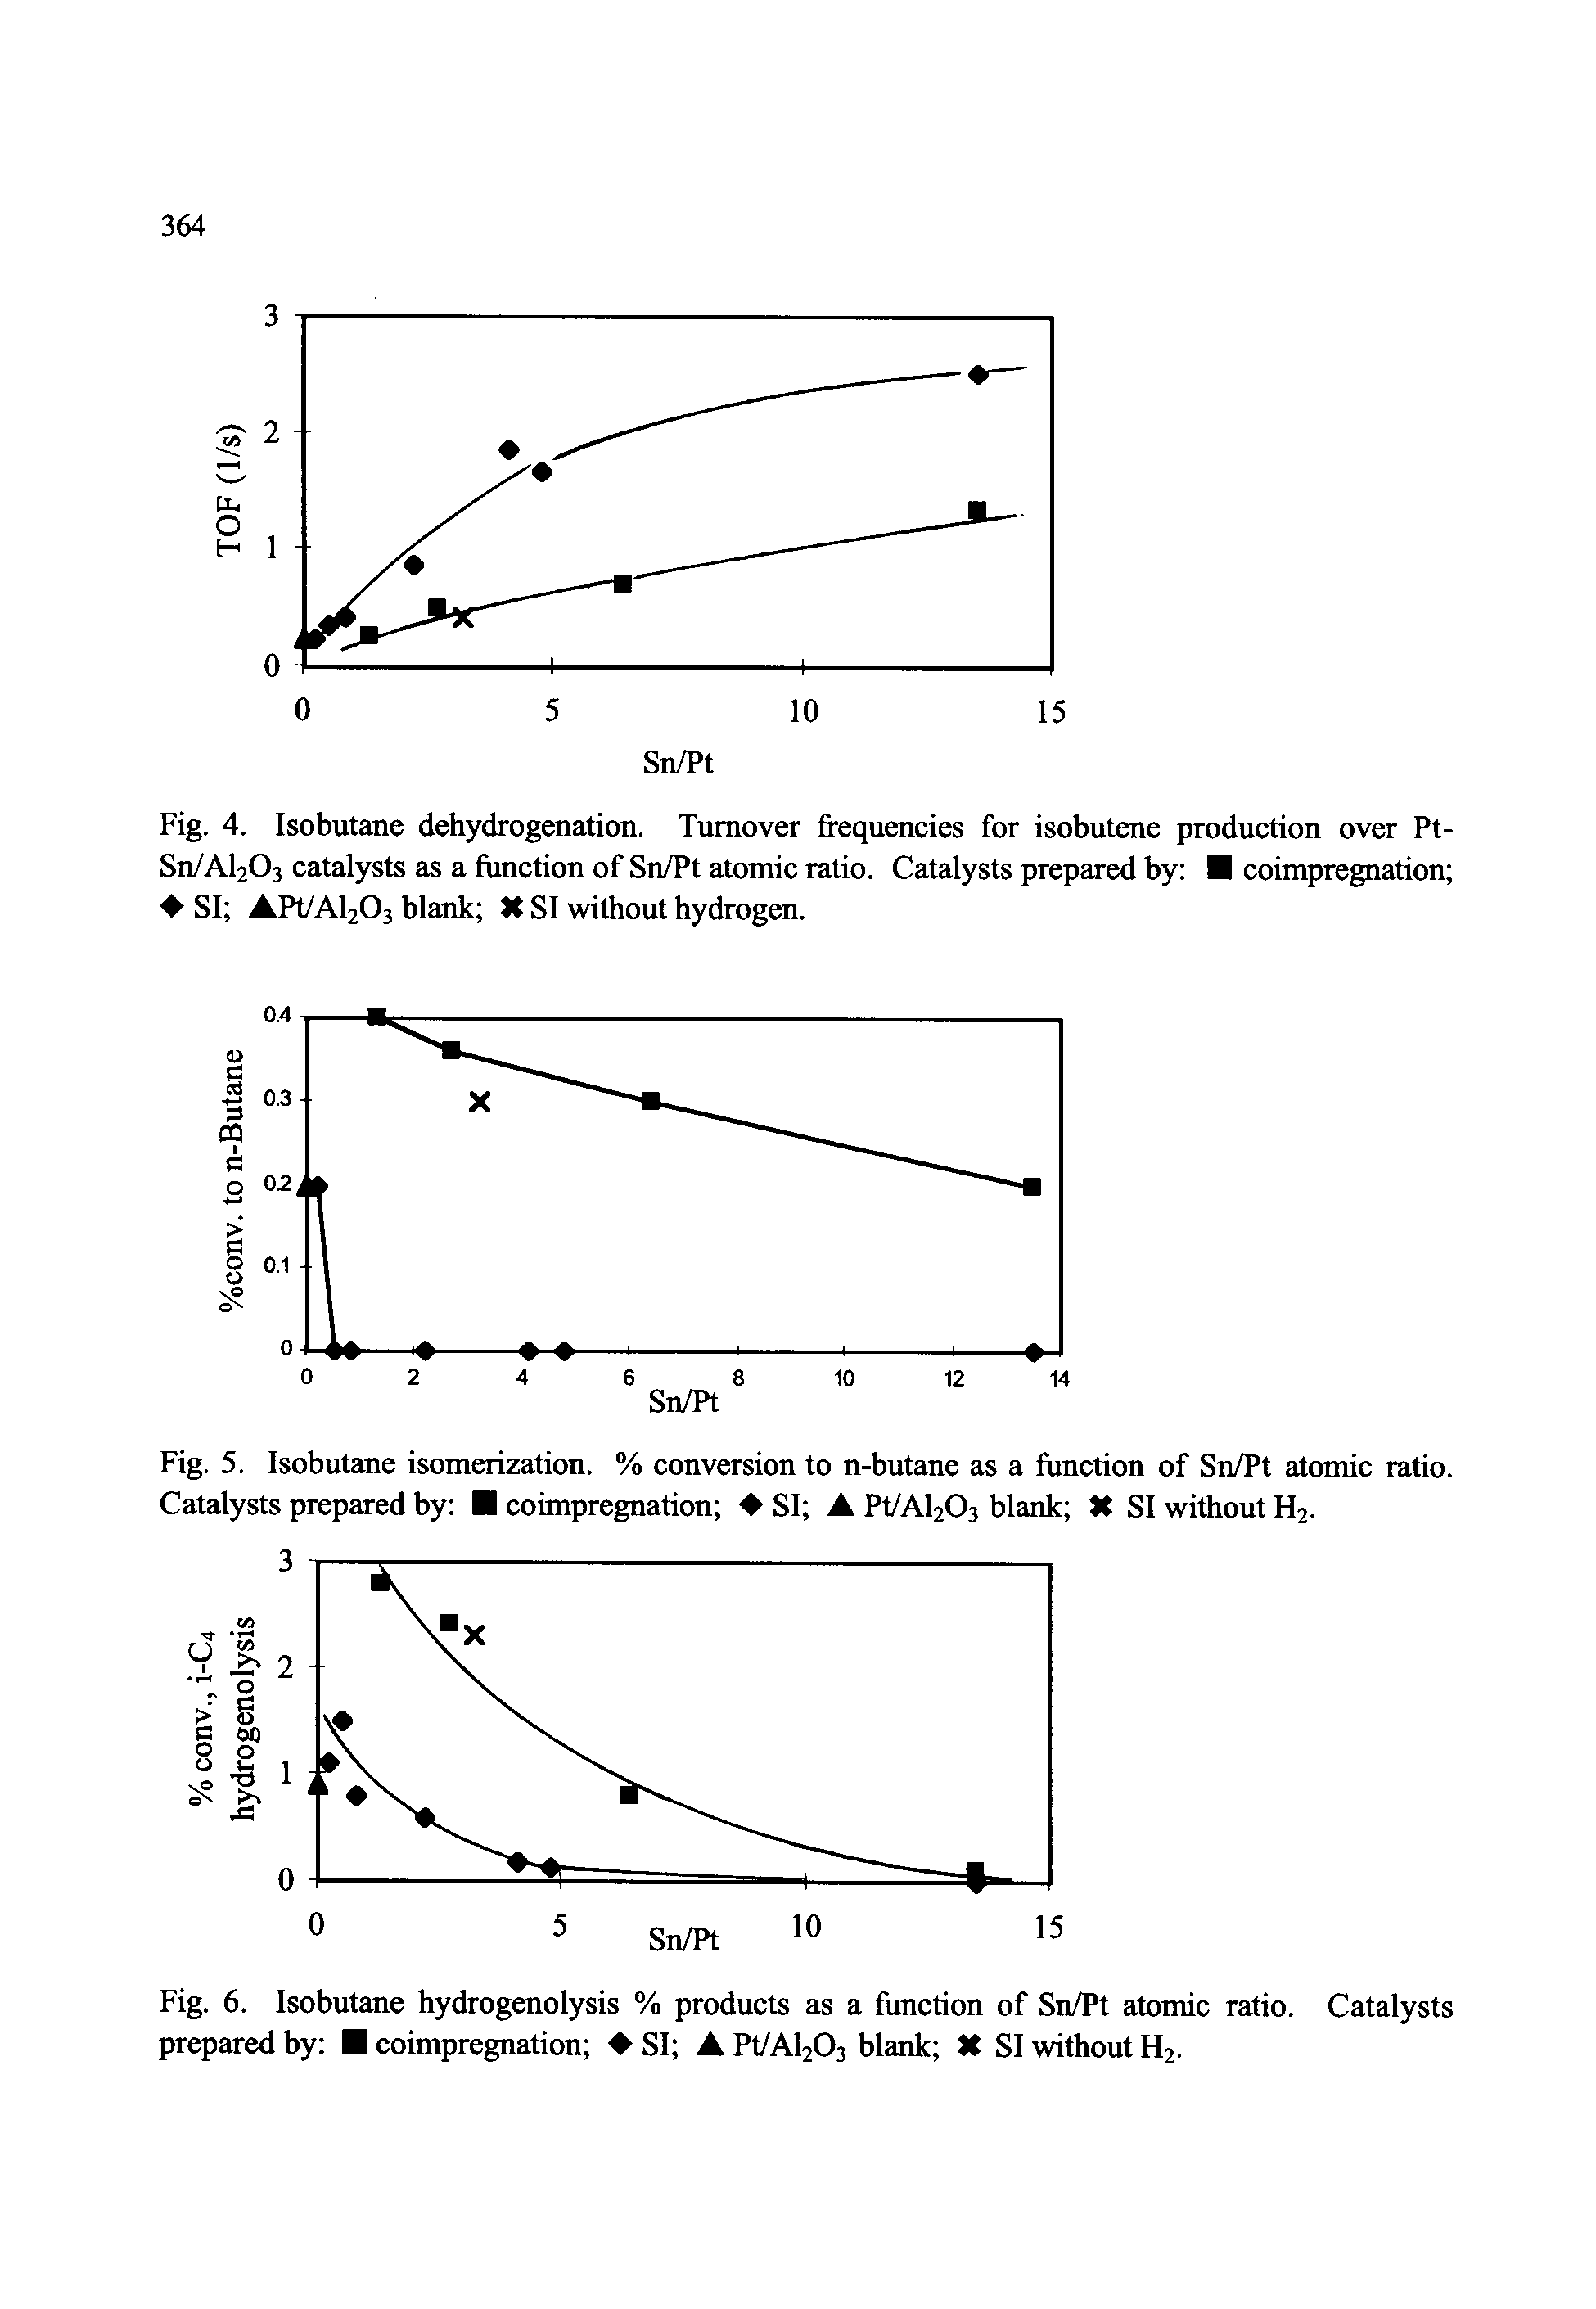 Fig. 5. Isobutane isomerization. % conversion to n-butane as a function of Sn/Pt atomic ratio. Catalysts prepared by coimpregnation SI Pt/Al203 blank X SI without H2.